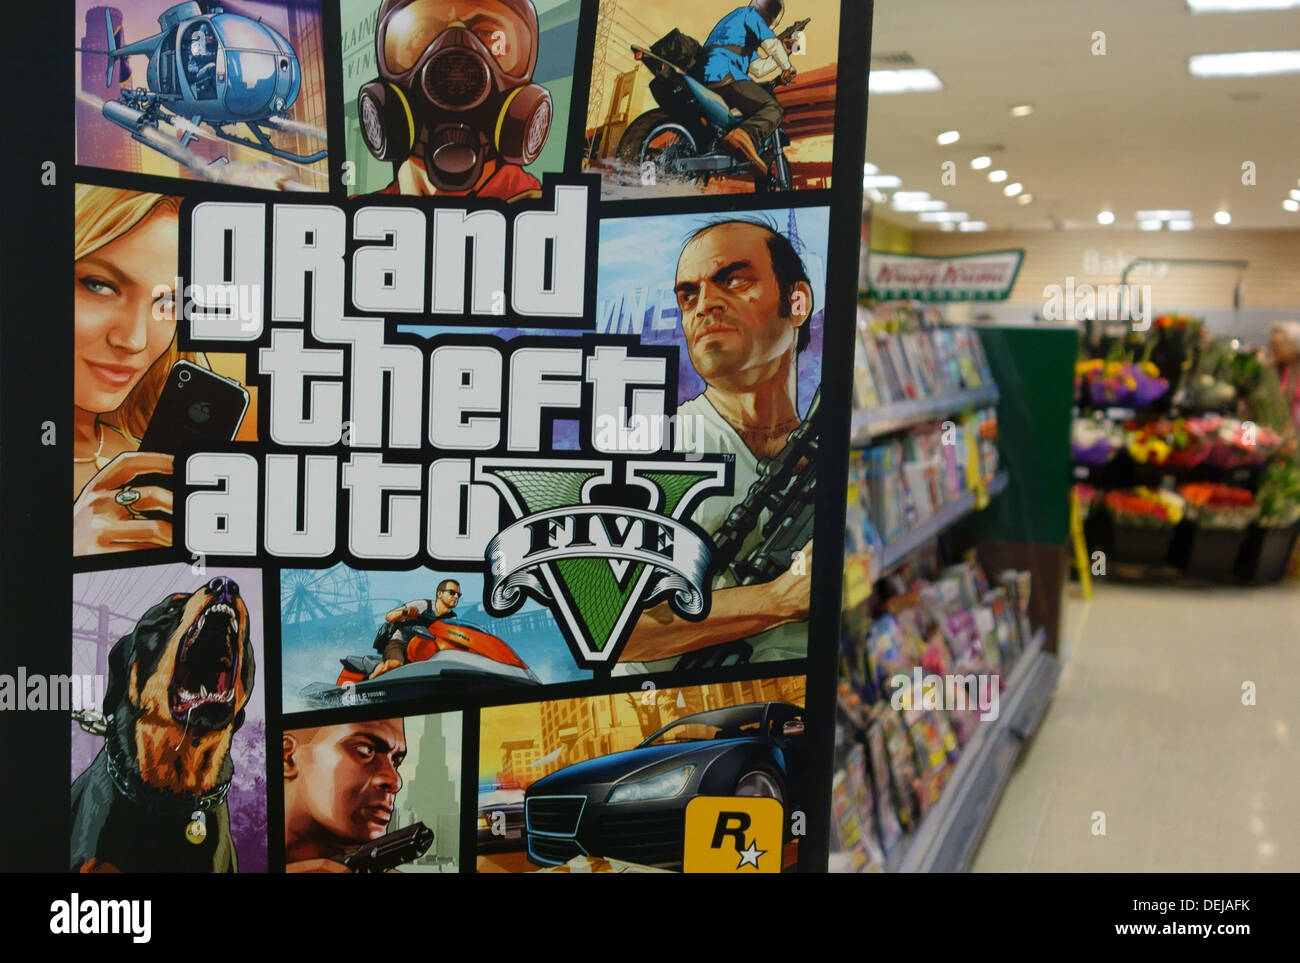 Grand Theft Auto V computer game point-of-sale promotional material Stock Photo